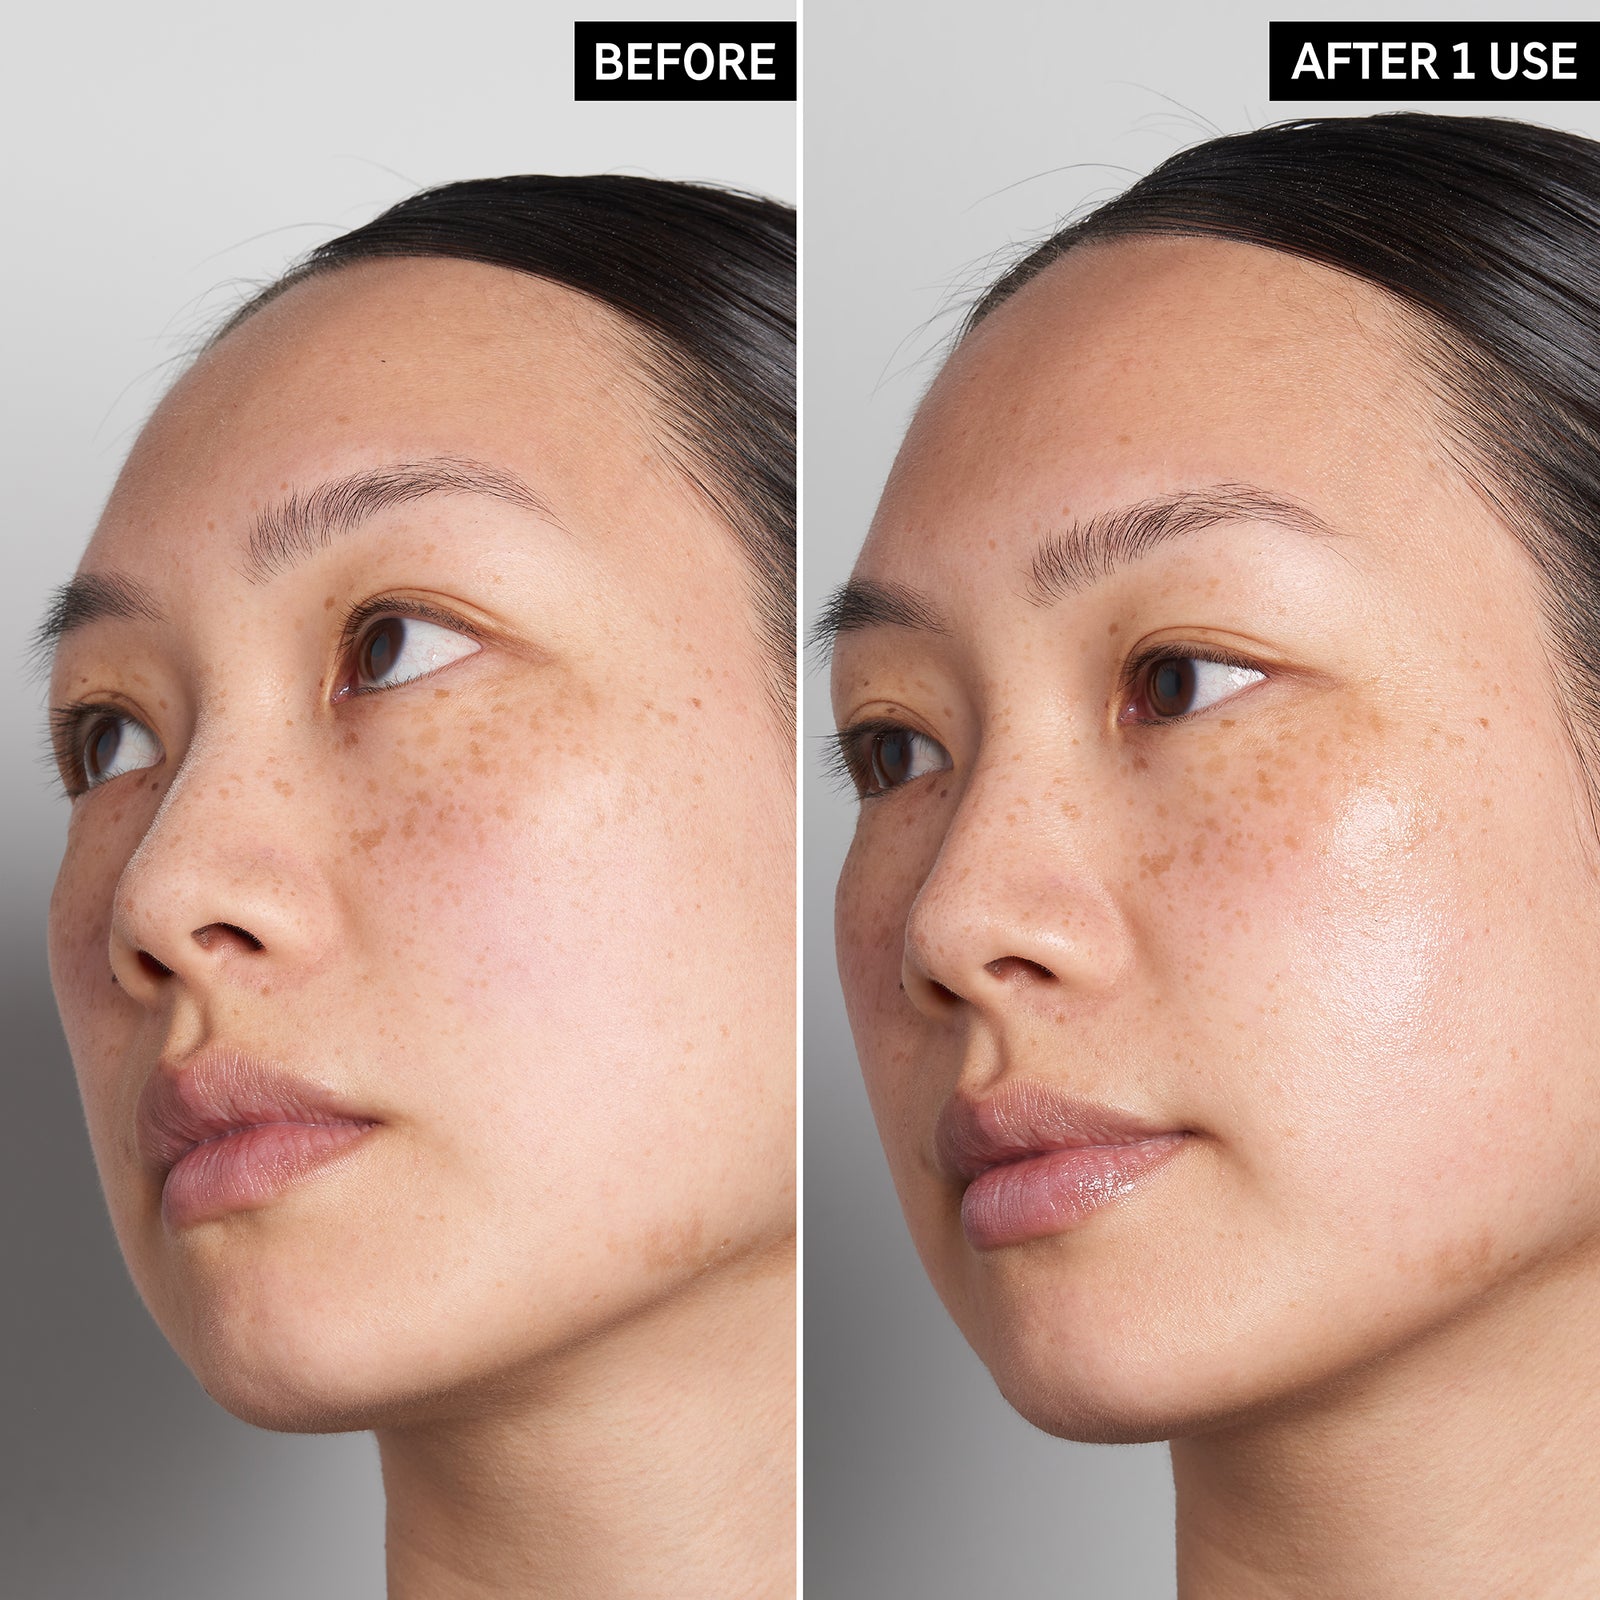 Before and after results using Supersize Hyaluronic Acid Serum Duo